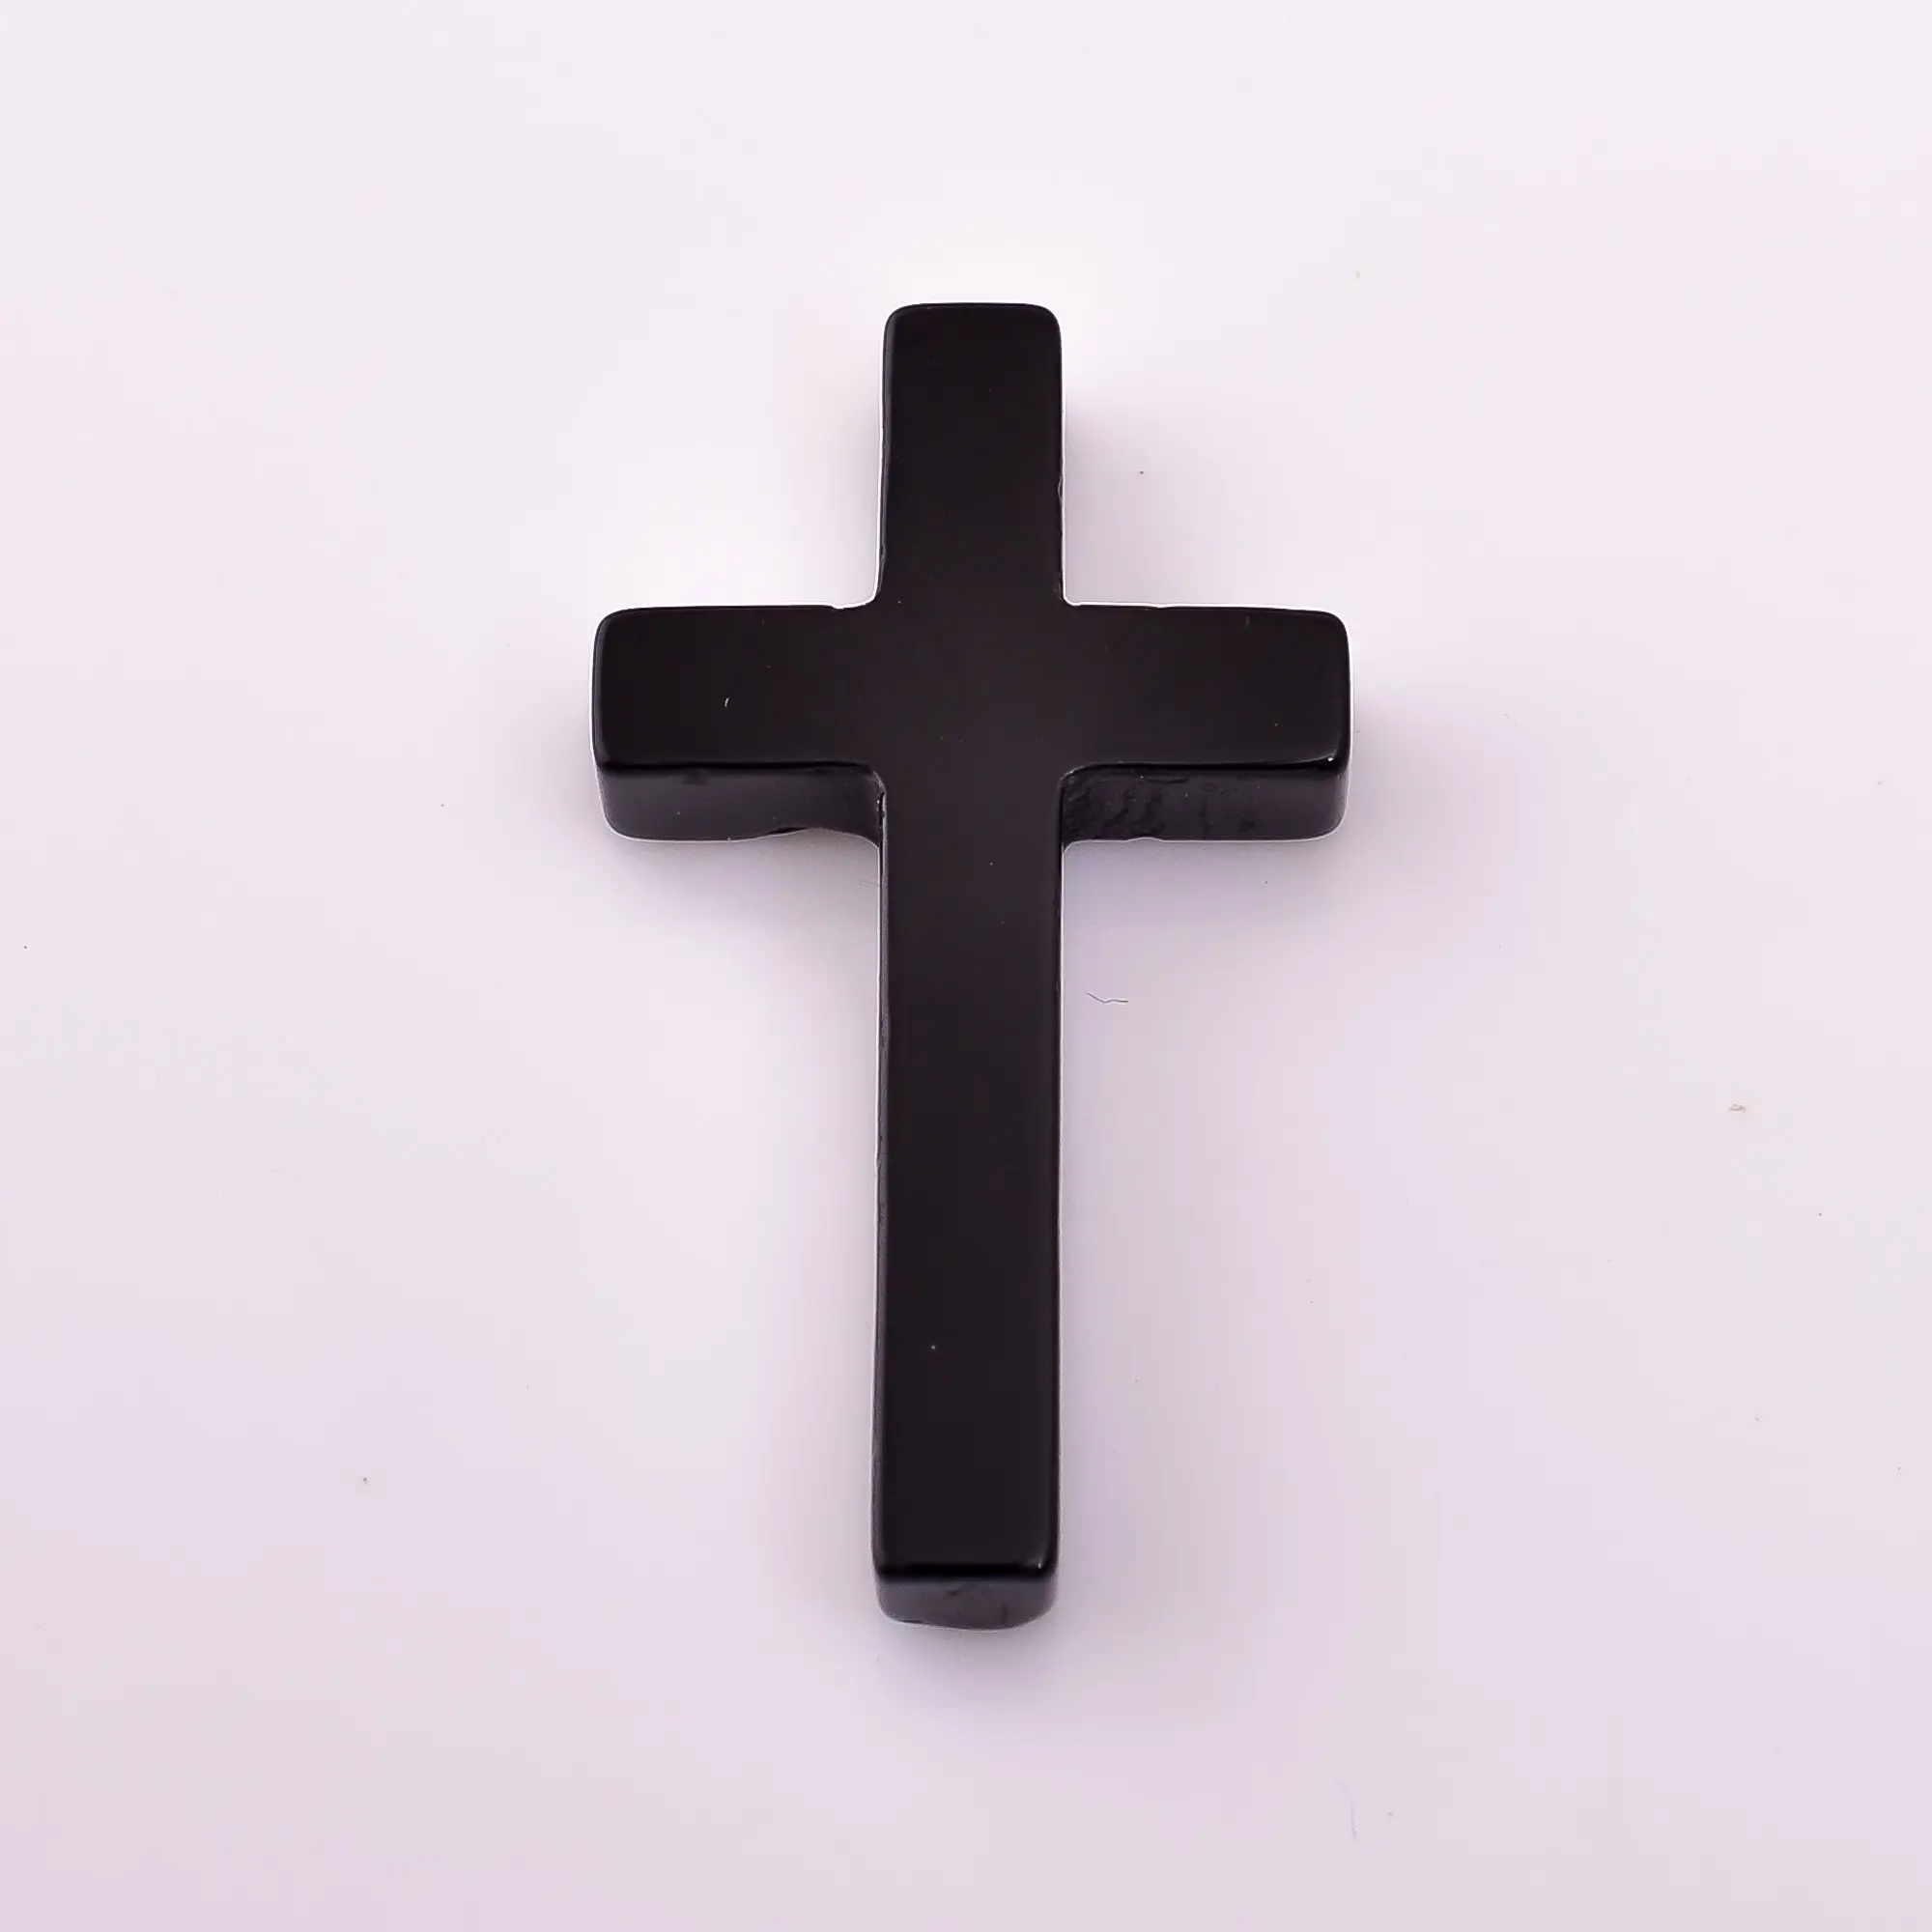 Natural Black Onyx Cross Shape Cabochon Smooth Cut Loose Gemstone Calibrated Stone For Jewelry Making Onyx Loose Stone